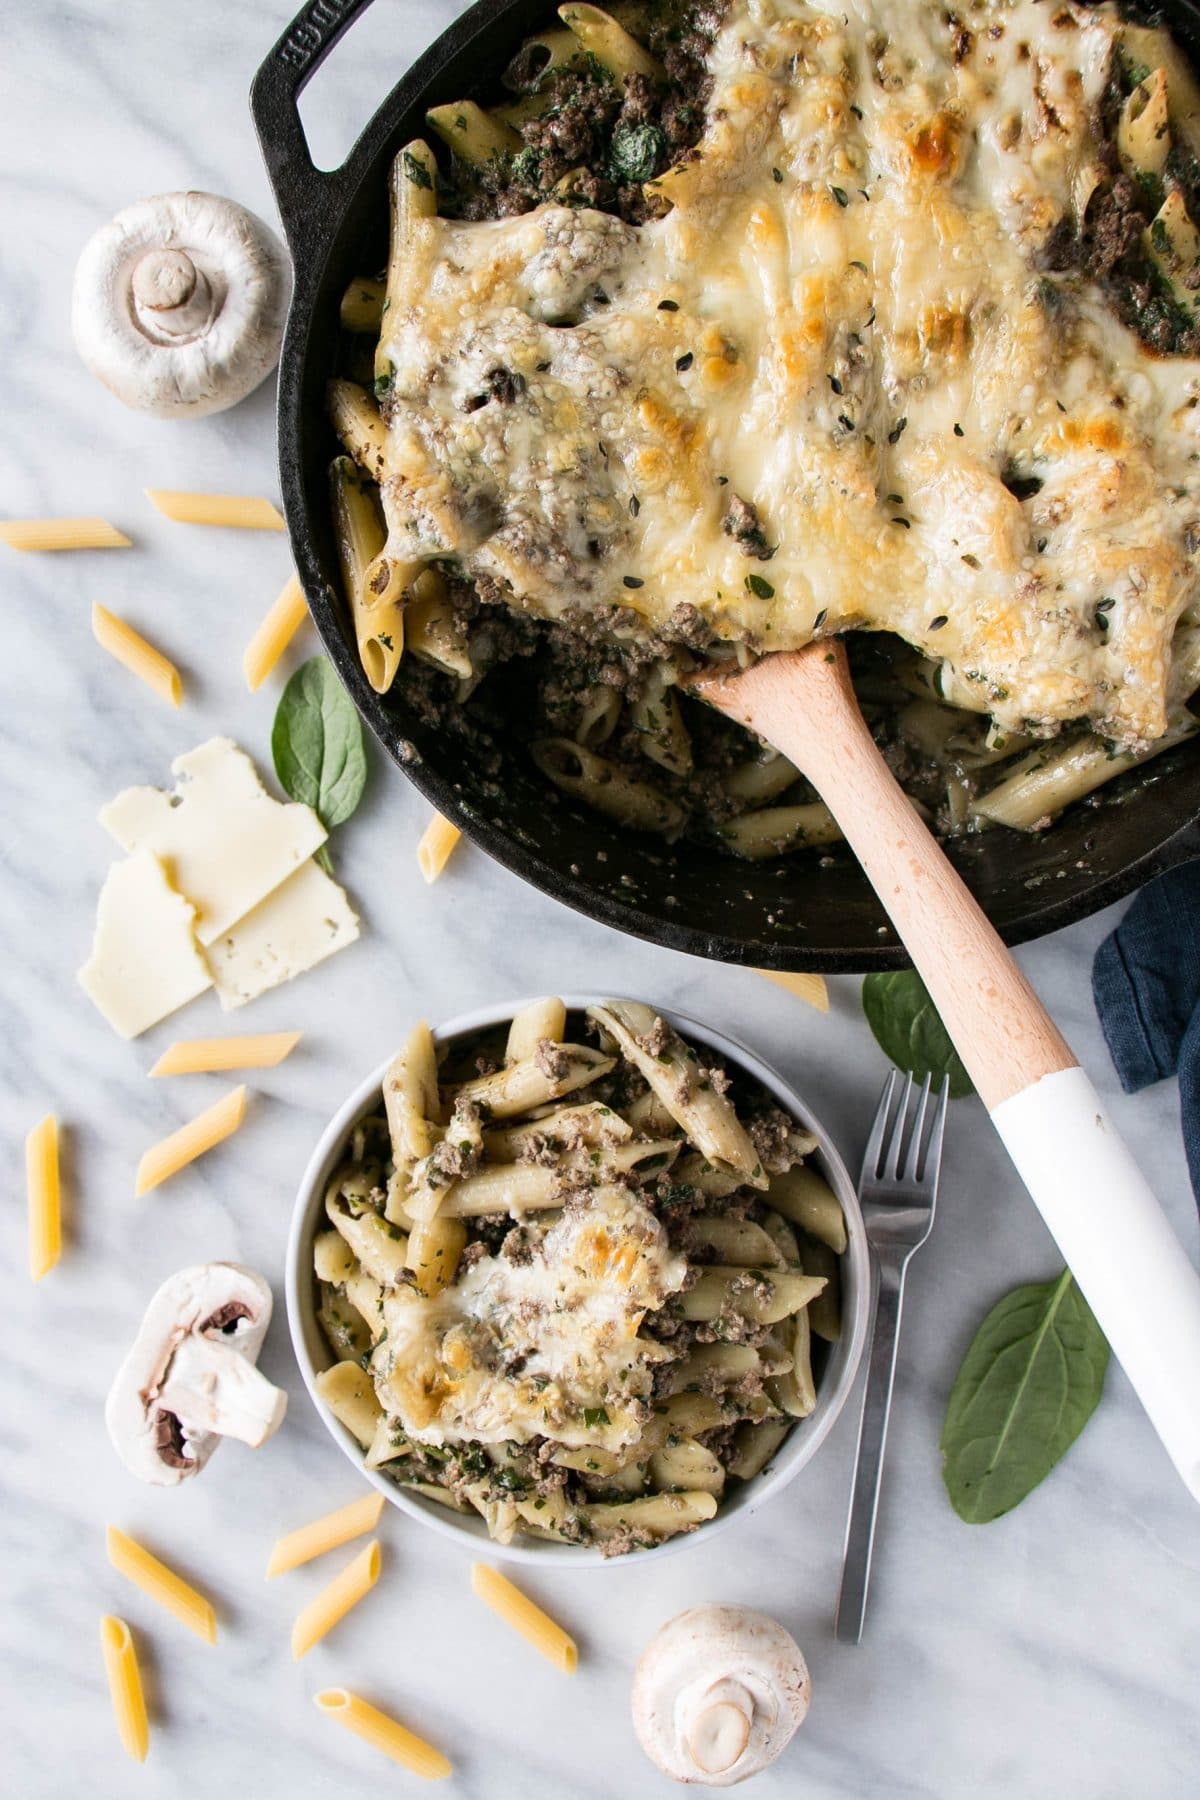 One Pot Bacon Mushroom Swiss Burger Pasta is a quick one pot meal that is packed with cheesy comfort food and vegetables like mushrooms and spinach - a true one pot dish!